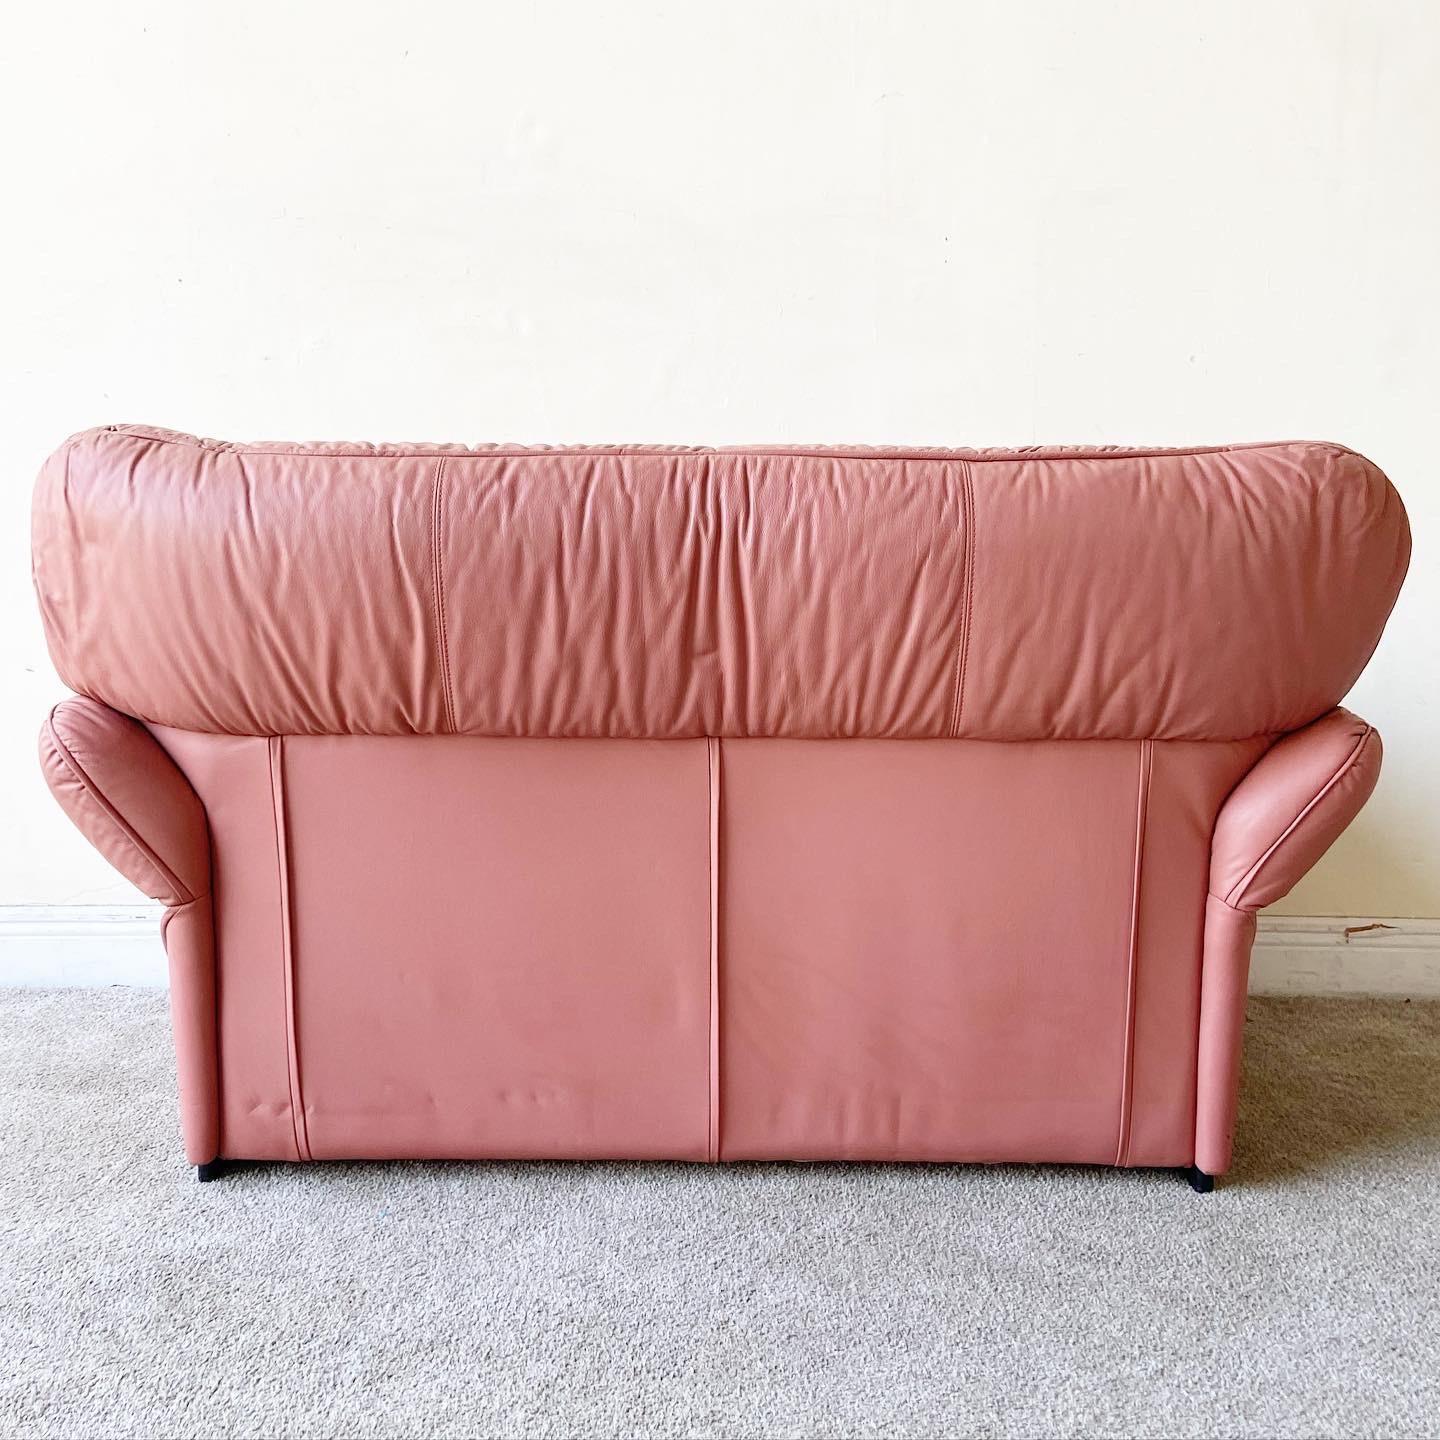 Incredible postmodern two seater love seat sofa by Pro-Design. Features a pink leatherette.
 